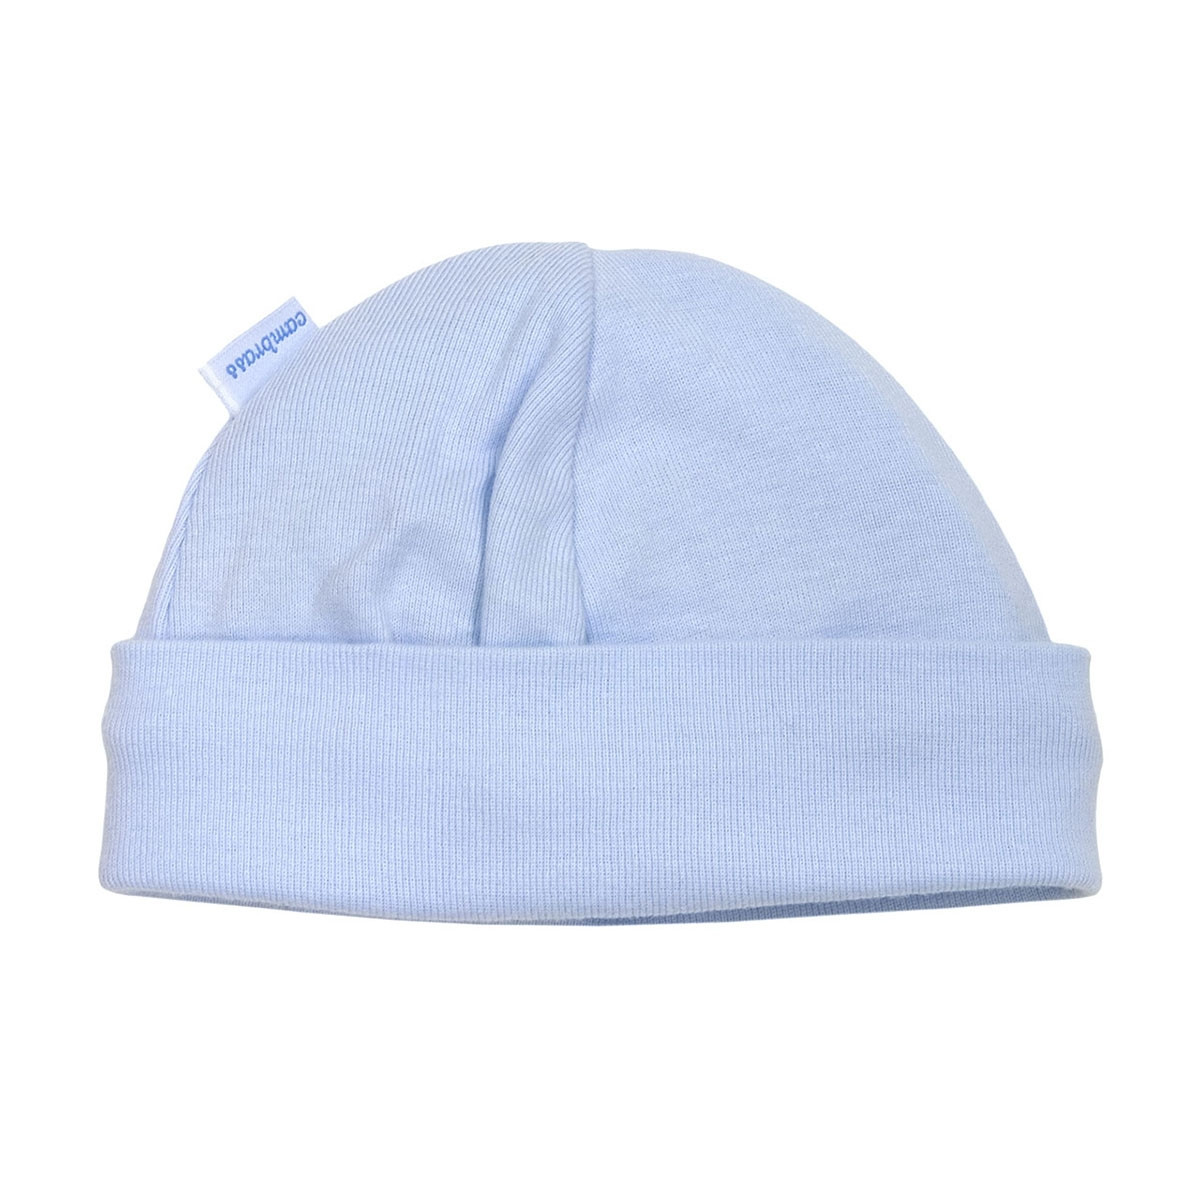 TRICOT CAP LISO BLUE CAMBRASS - 1